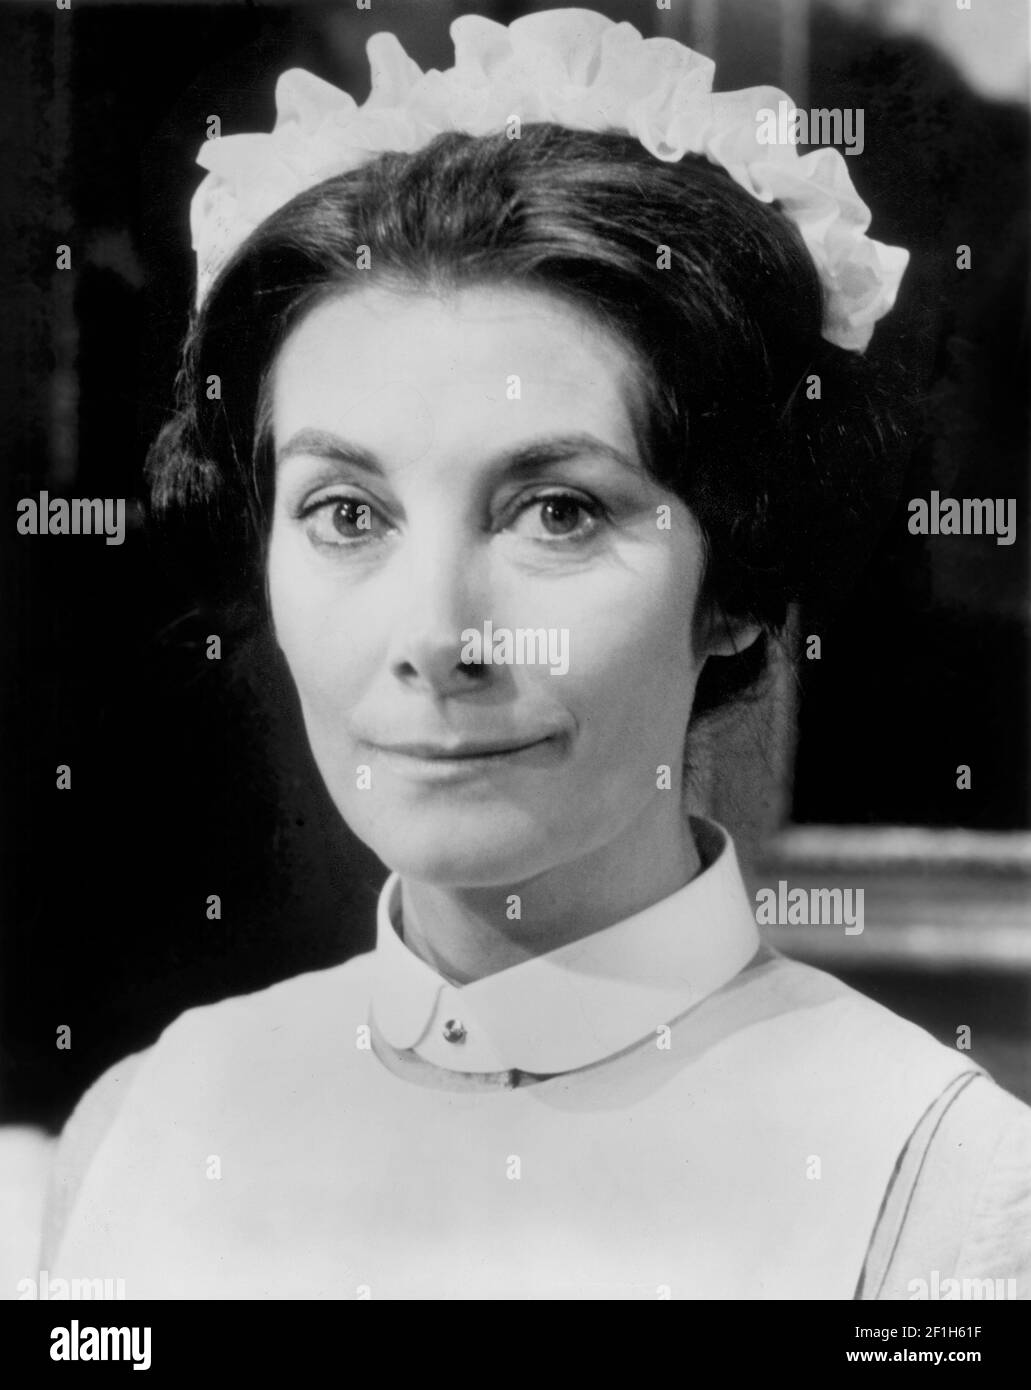 Jean Marsh, Head and Shoulders Publicity Portrait for The British TV Drama Series, 'Upstairs, Downstairs', ITV, 1976 Stock Photo